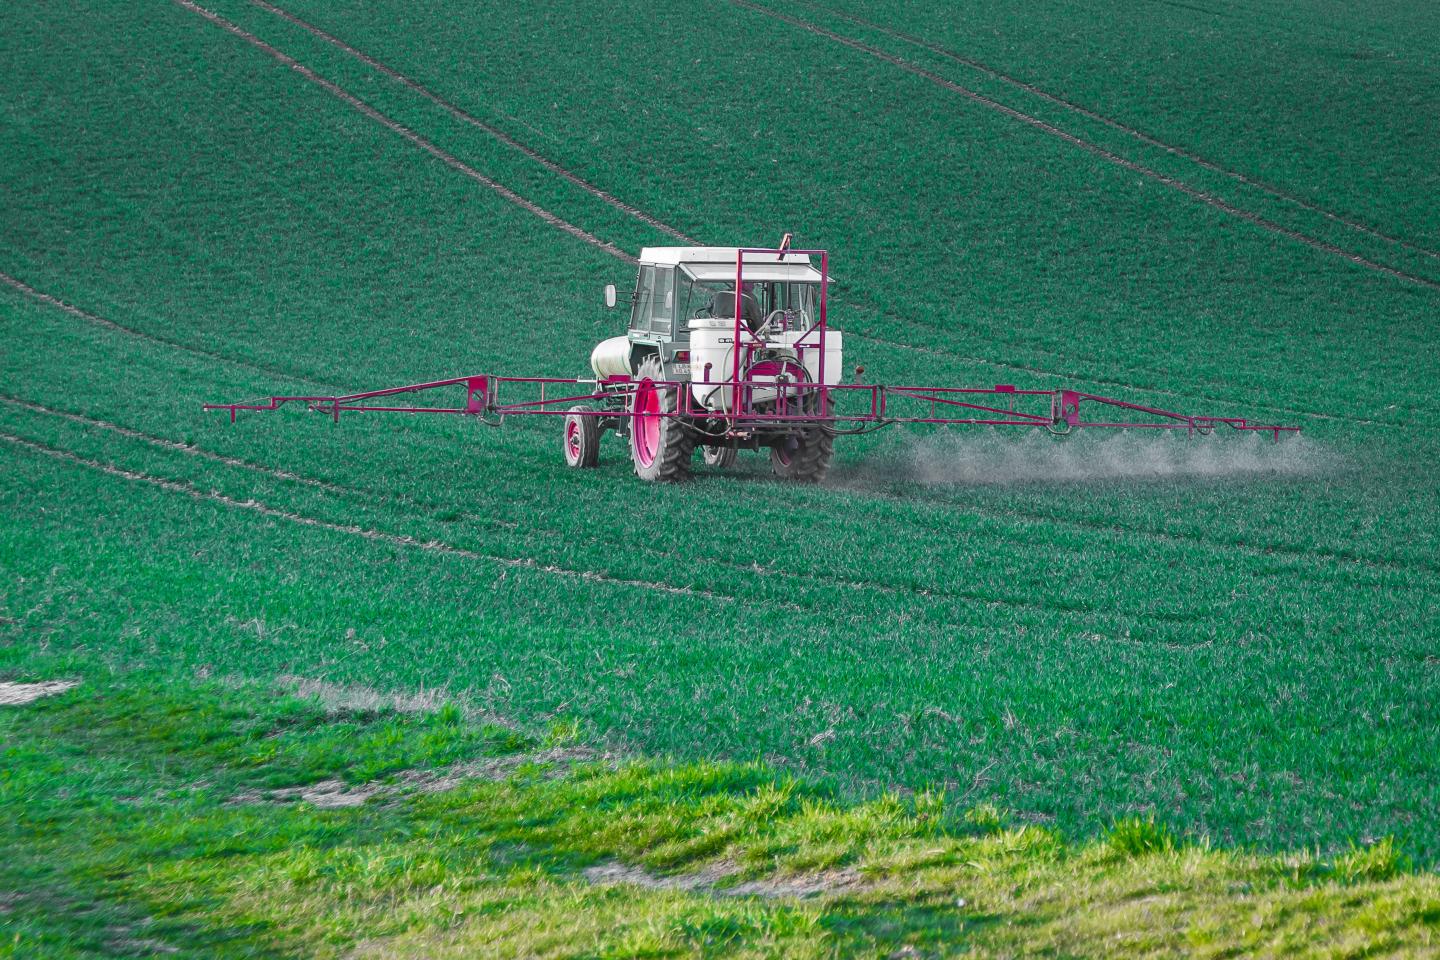 Fungicides are worldwide used in agriculture.